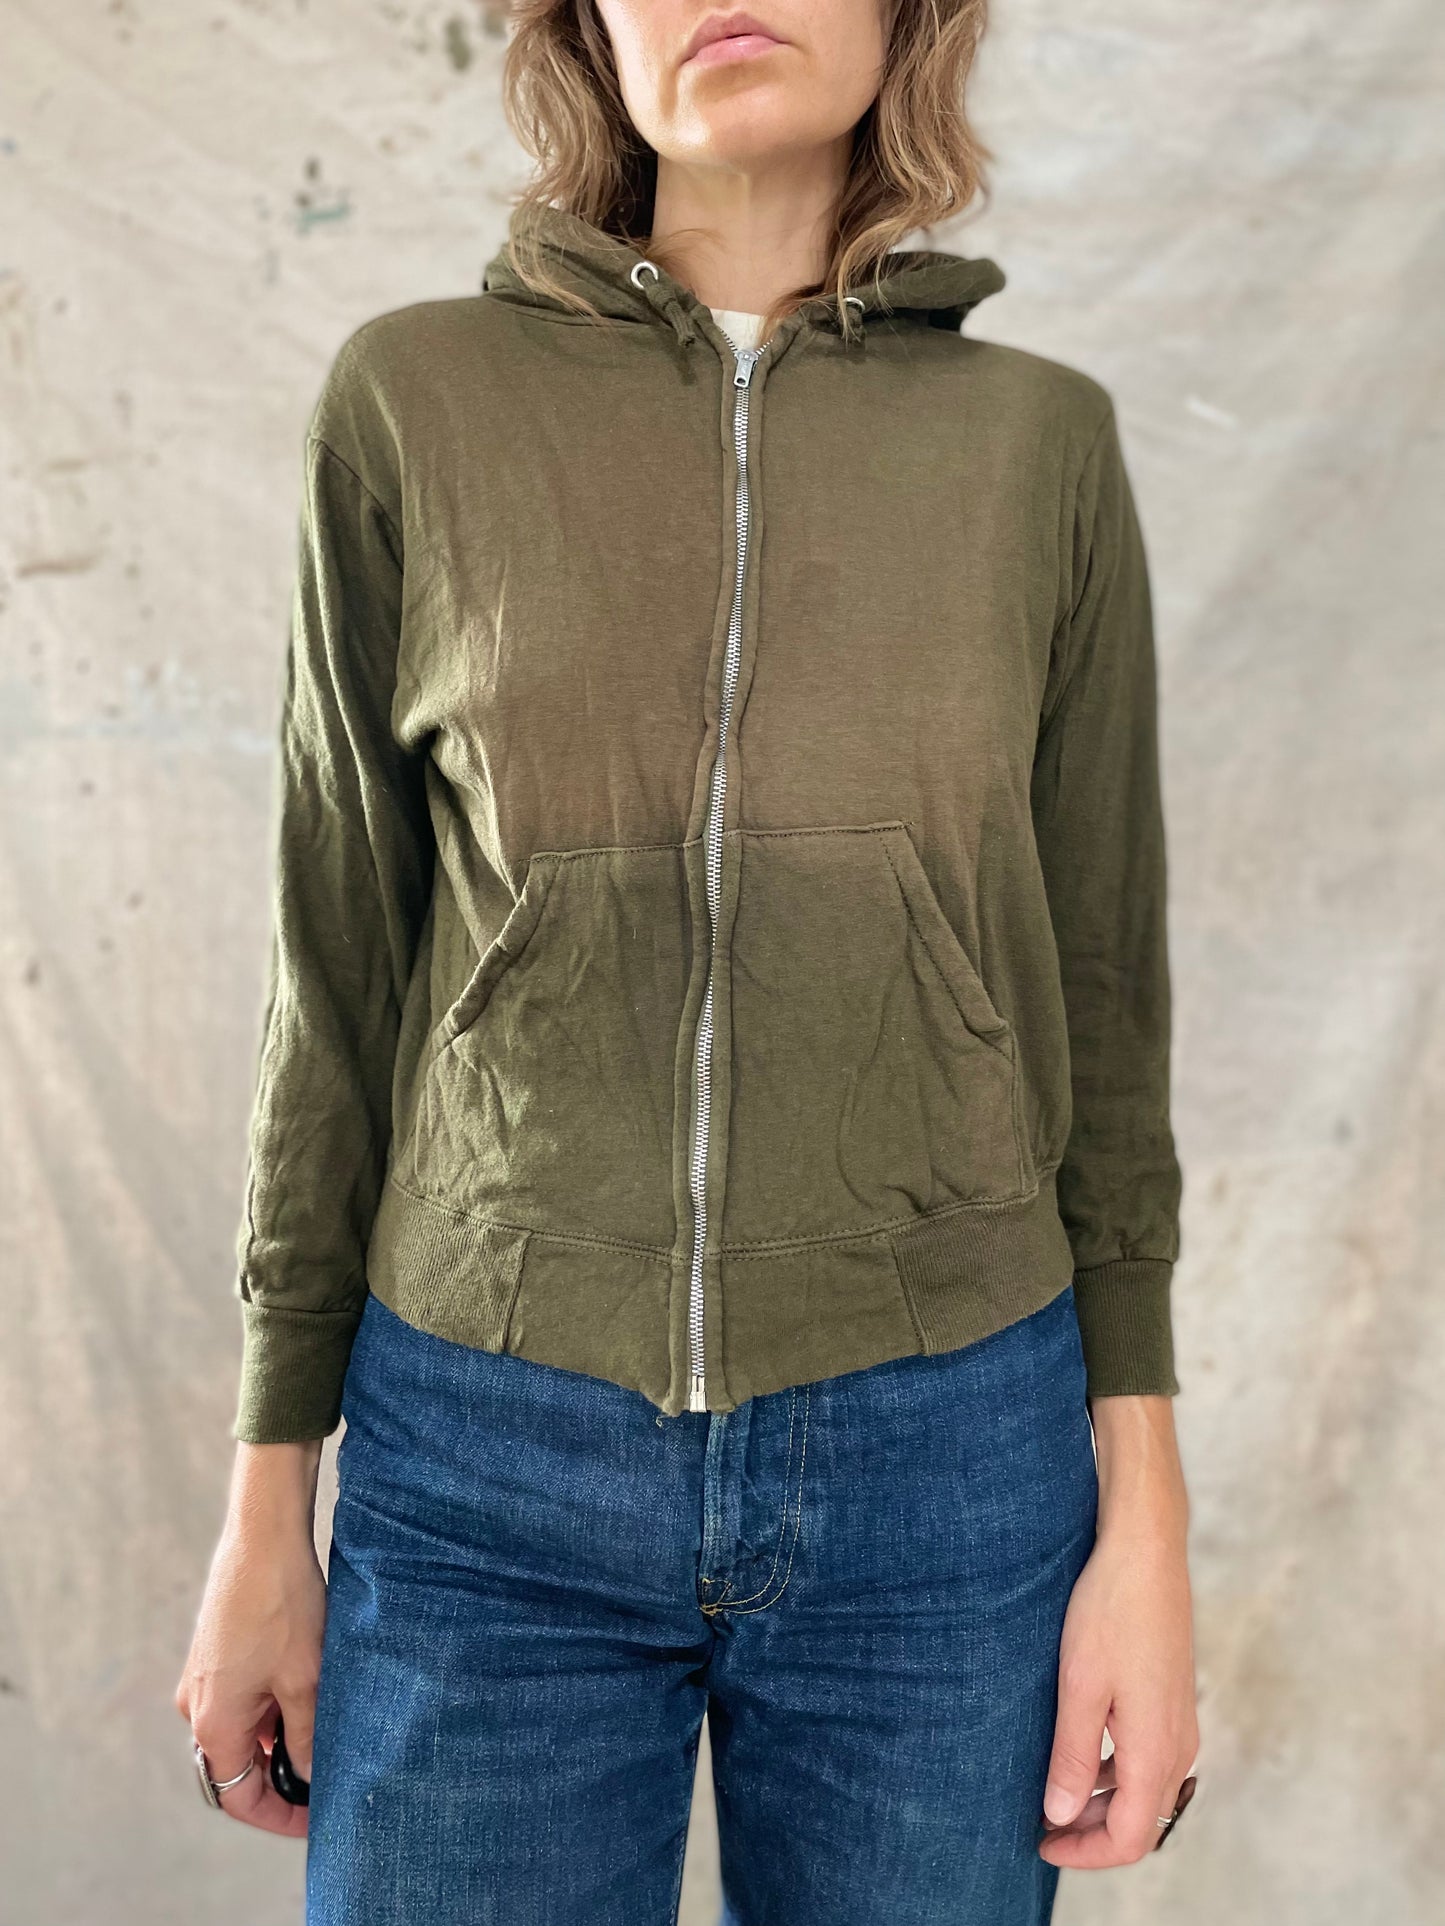 60s/70s Thermal Lined Olive Green Hoodie